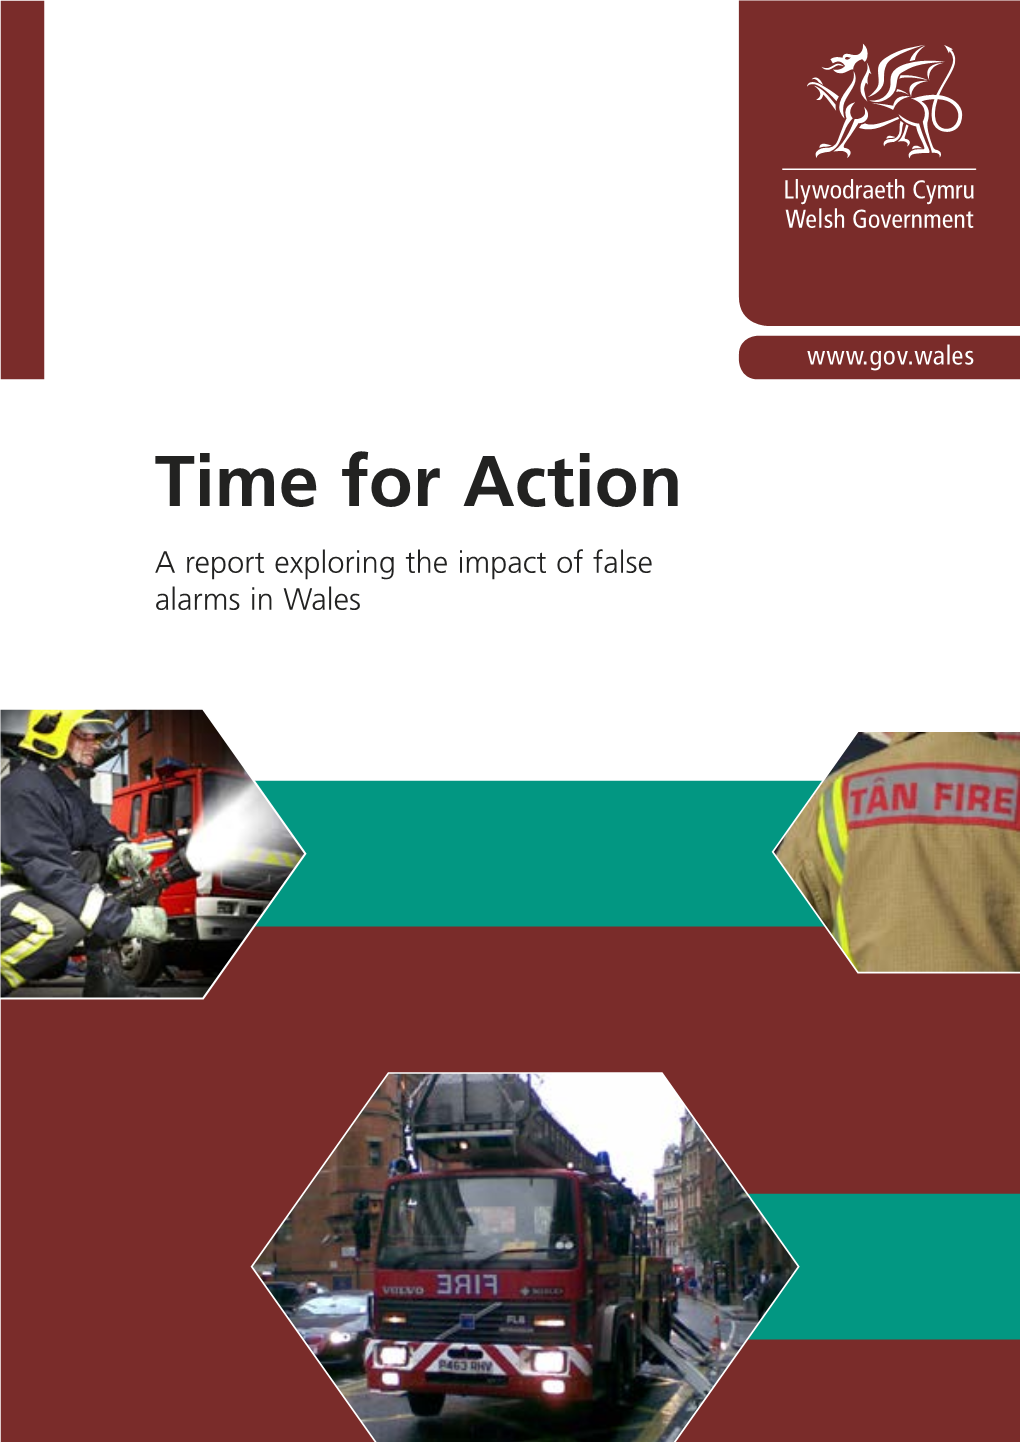 Time for Action a Report Exploring the Impact of False Alarms in Wales Executive Summary